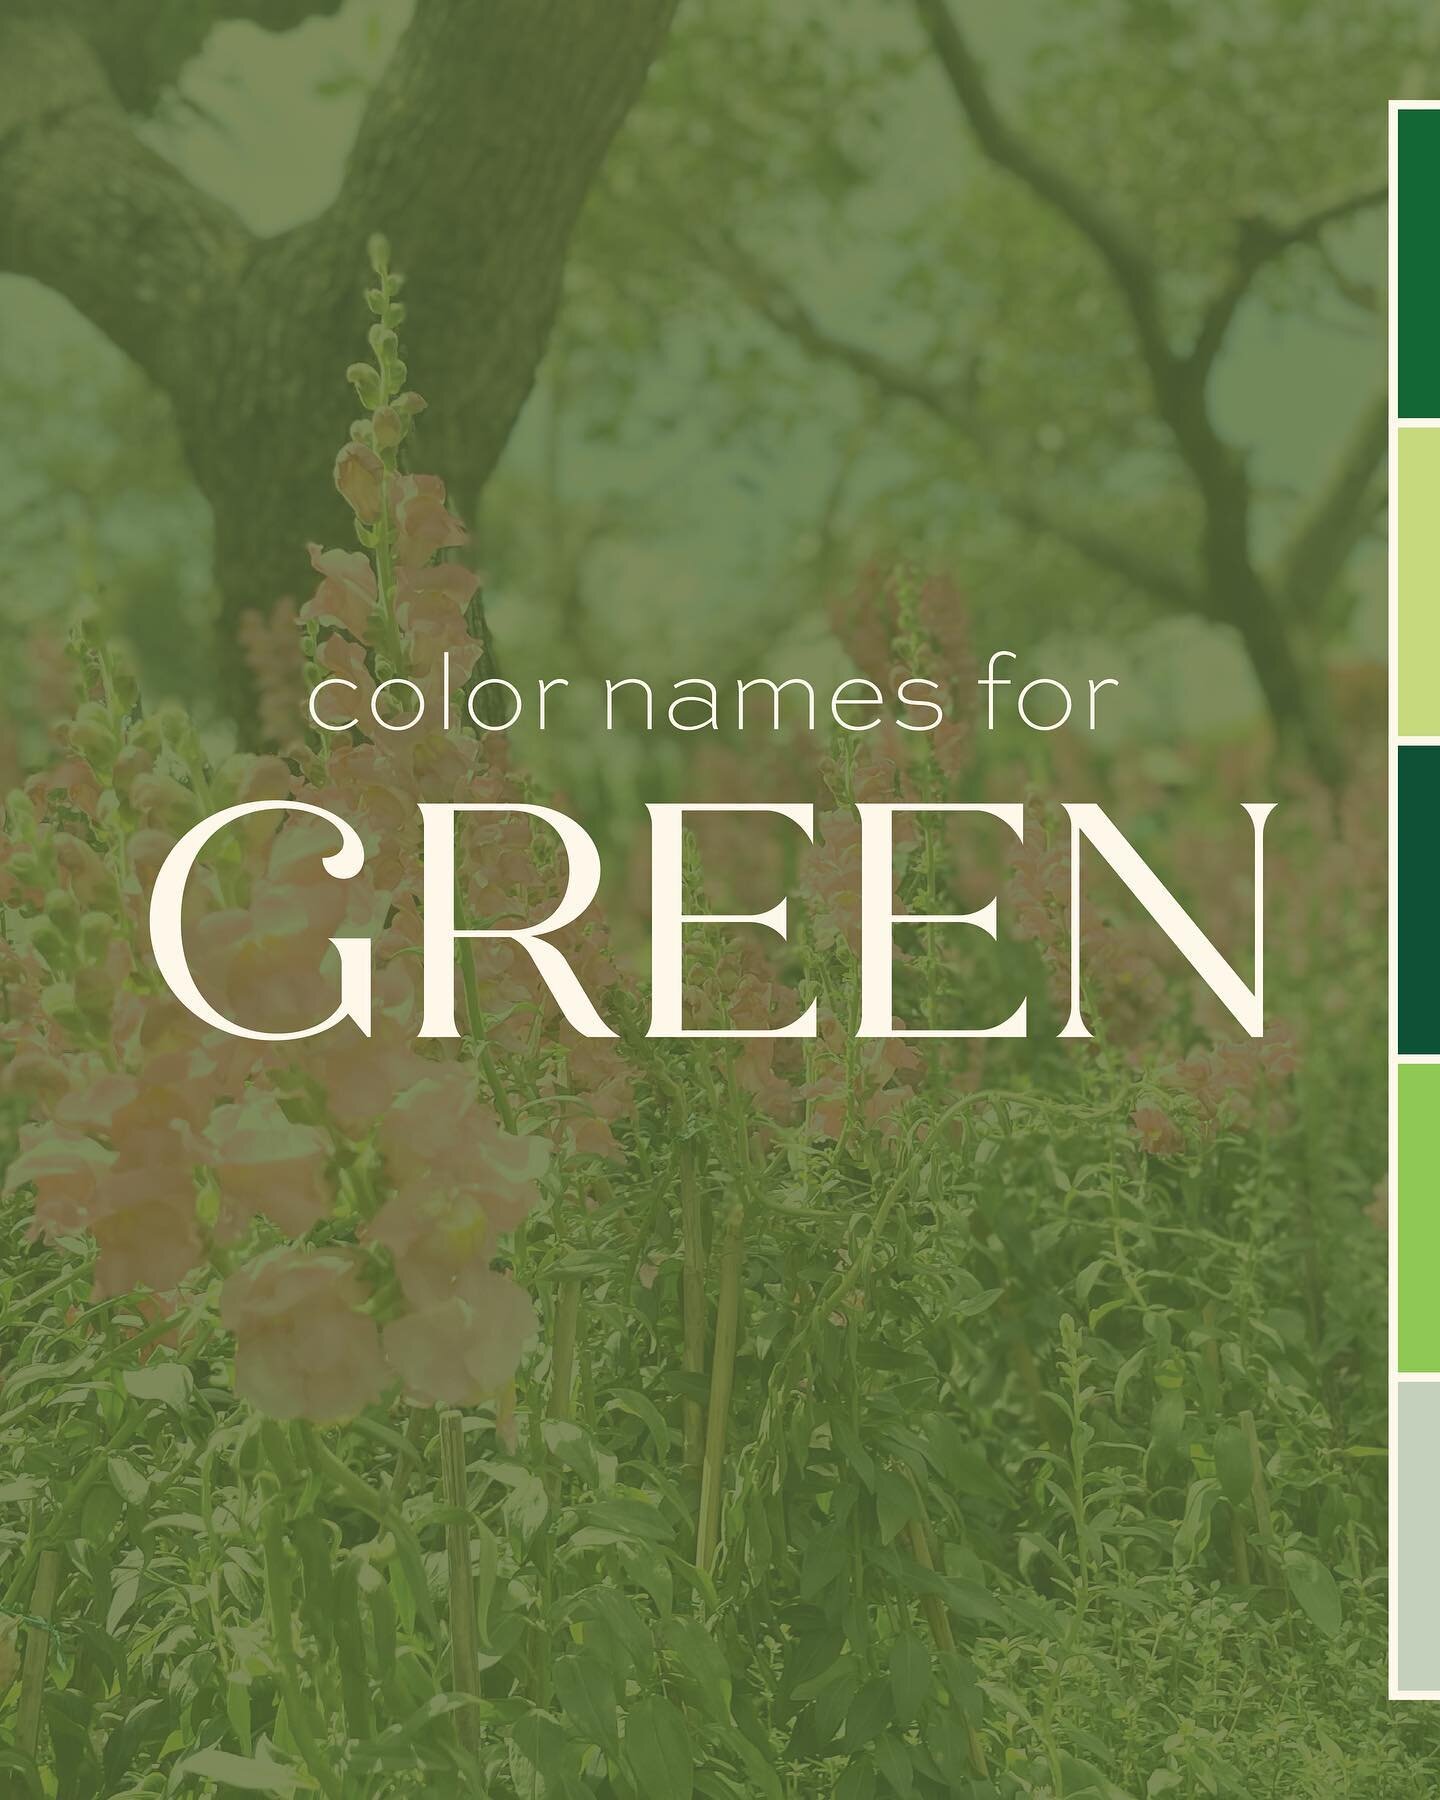 I know it sounds silly, but I LOVE naming colors. giving colors fun names for your project creates a personality and makes it come to life even more.

leave a comment, and let me know which one is your favorite!💚🌱

#graphicdesign #graphicdesigner #